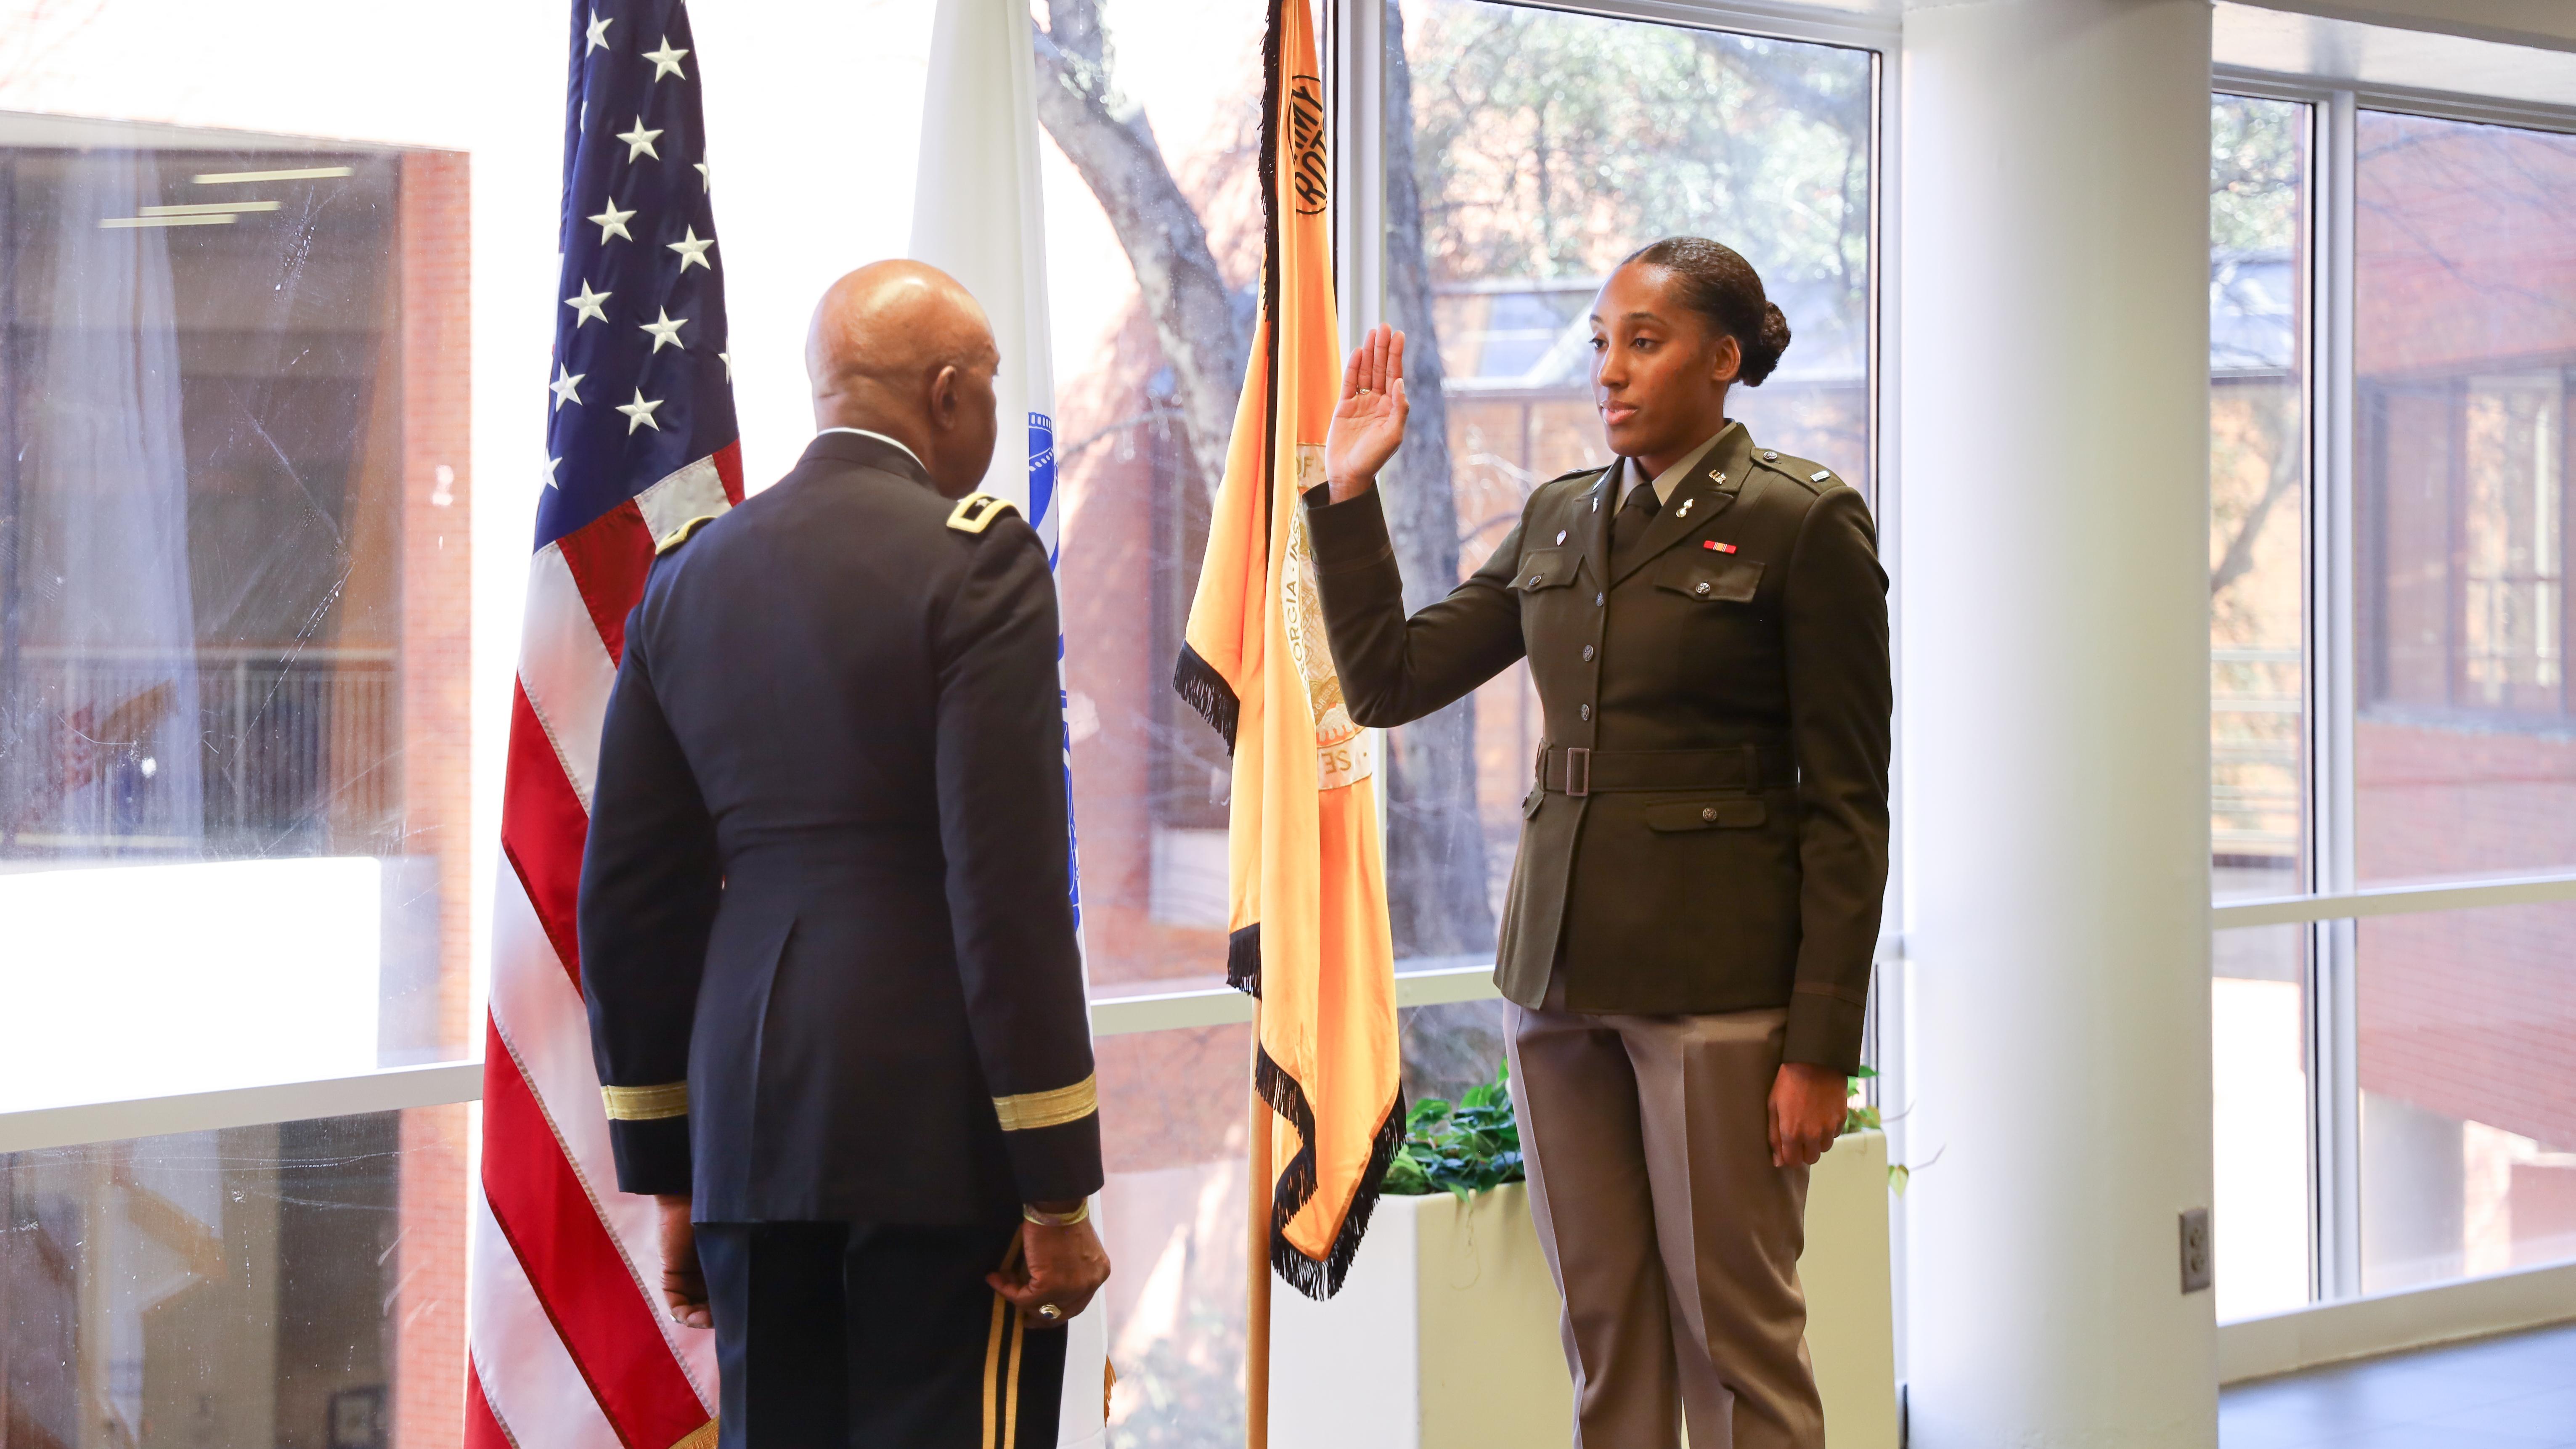 Jessica Rawls, Ceremony for Military Promotion Pin-On